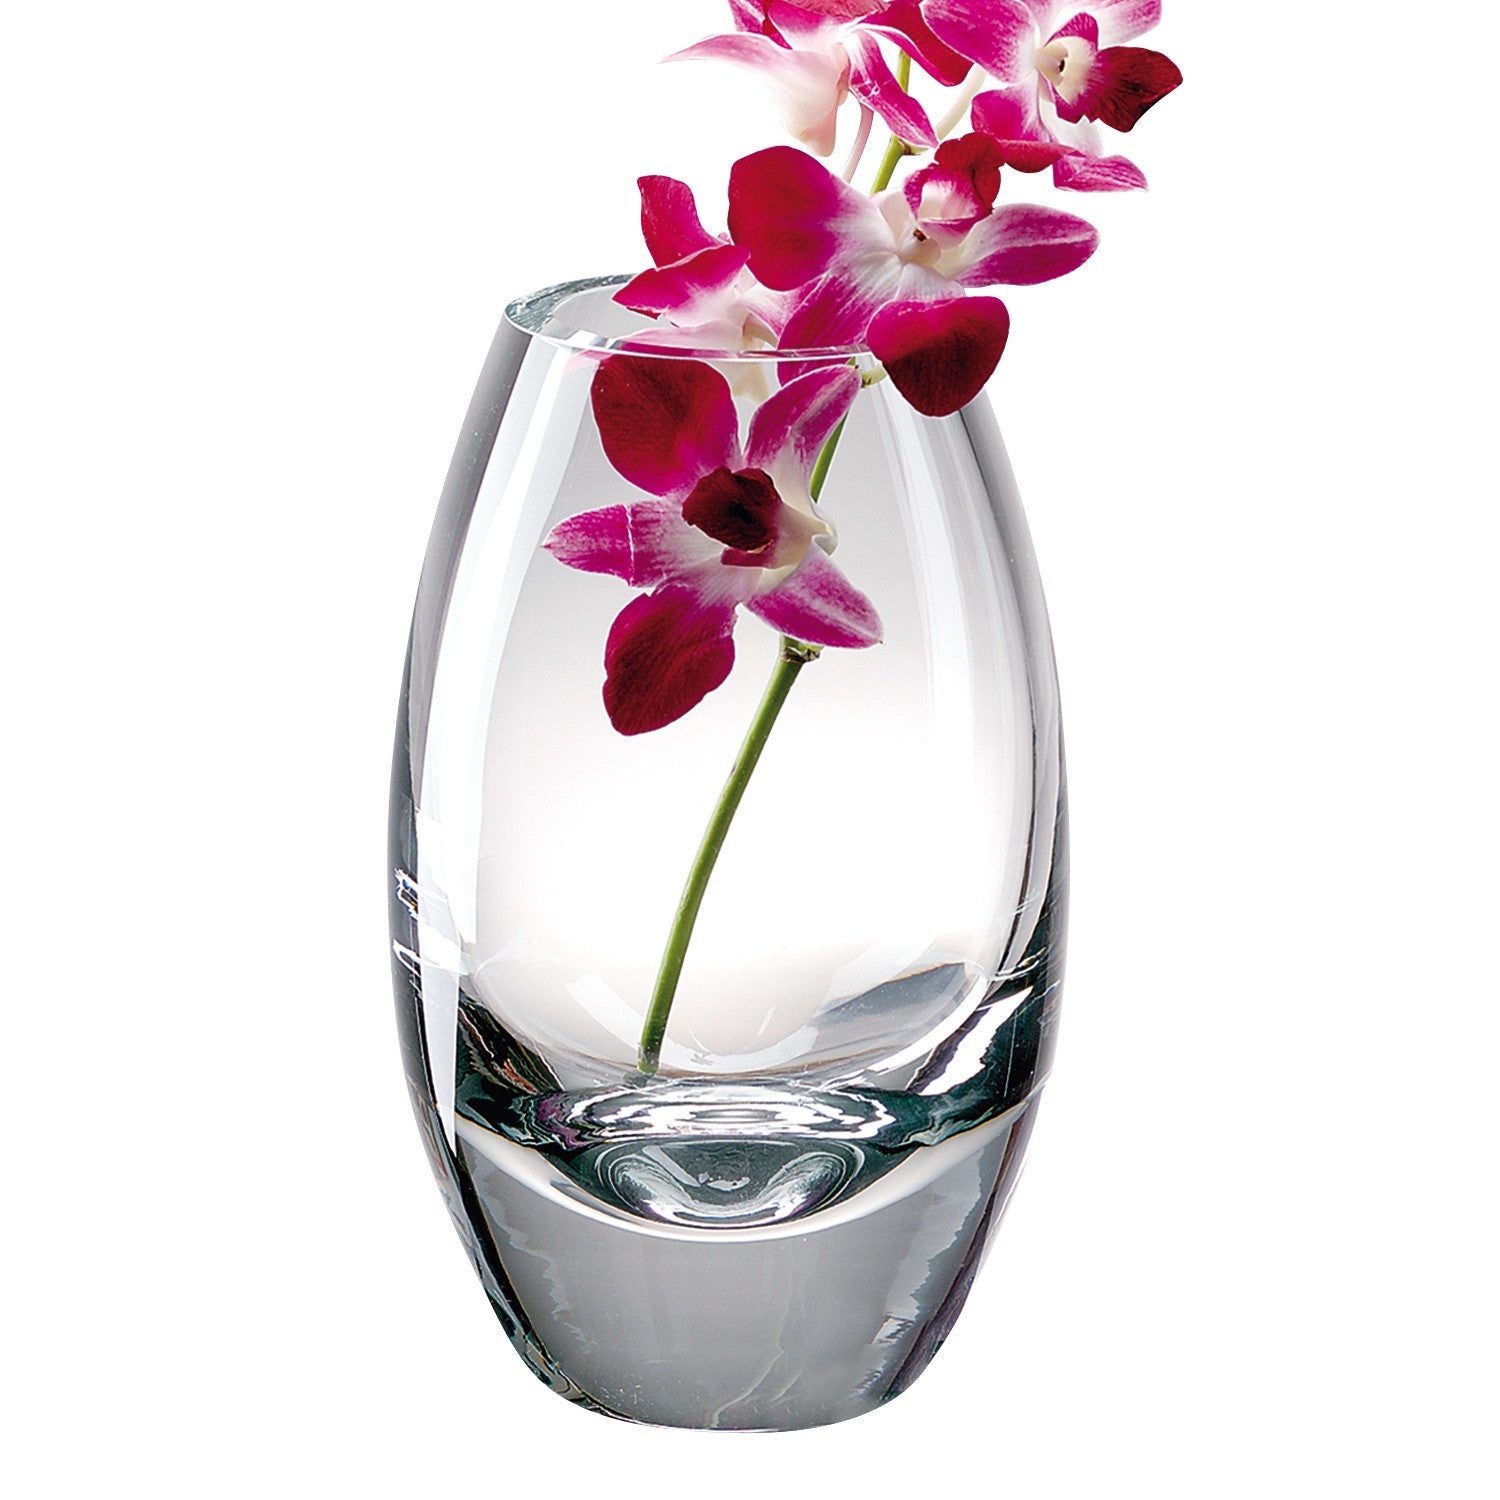 7" Clear Lead Free Crystal Oval Table Vase